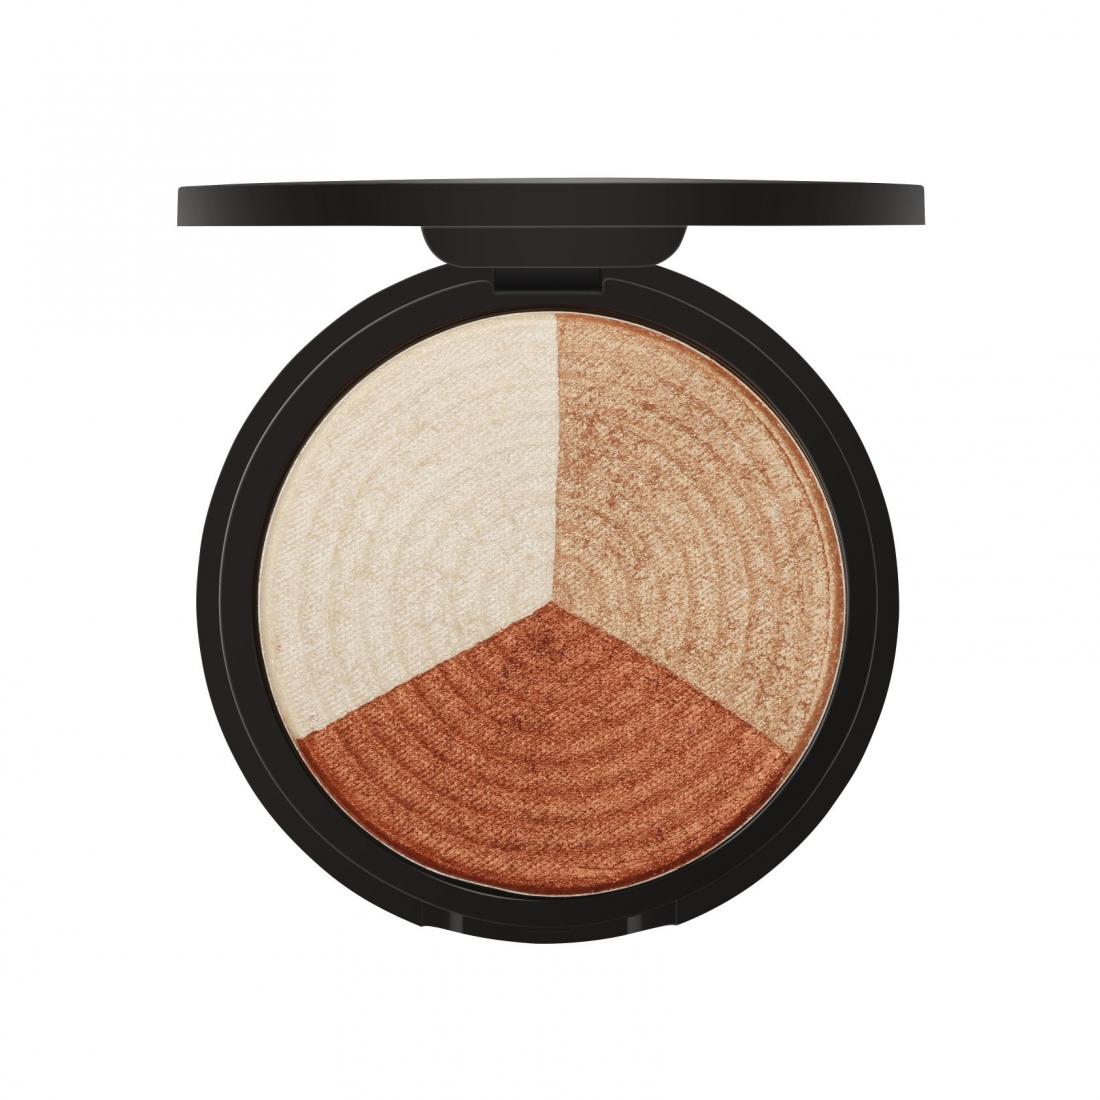 Bolver PEARL Highlighter - 3 colors 704